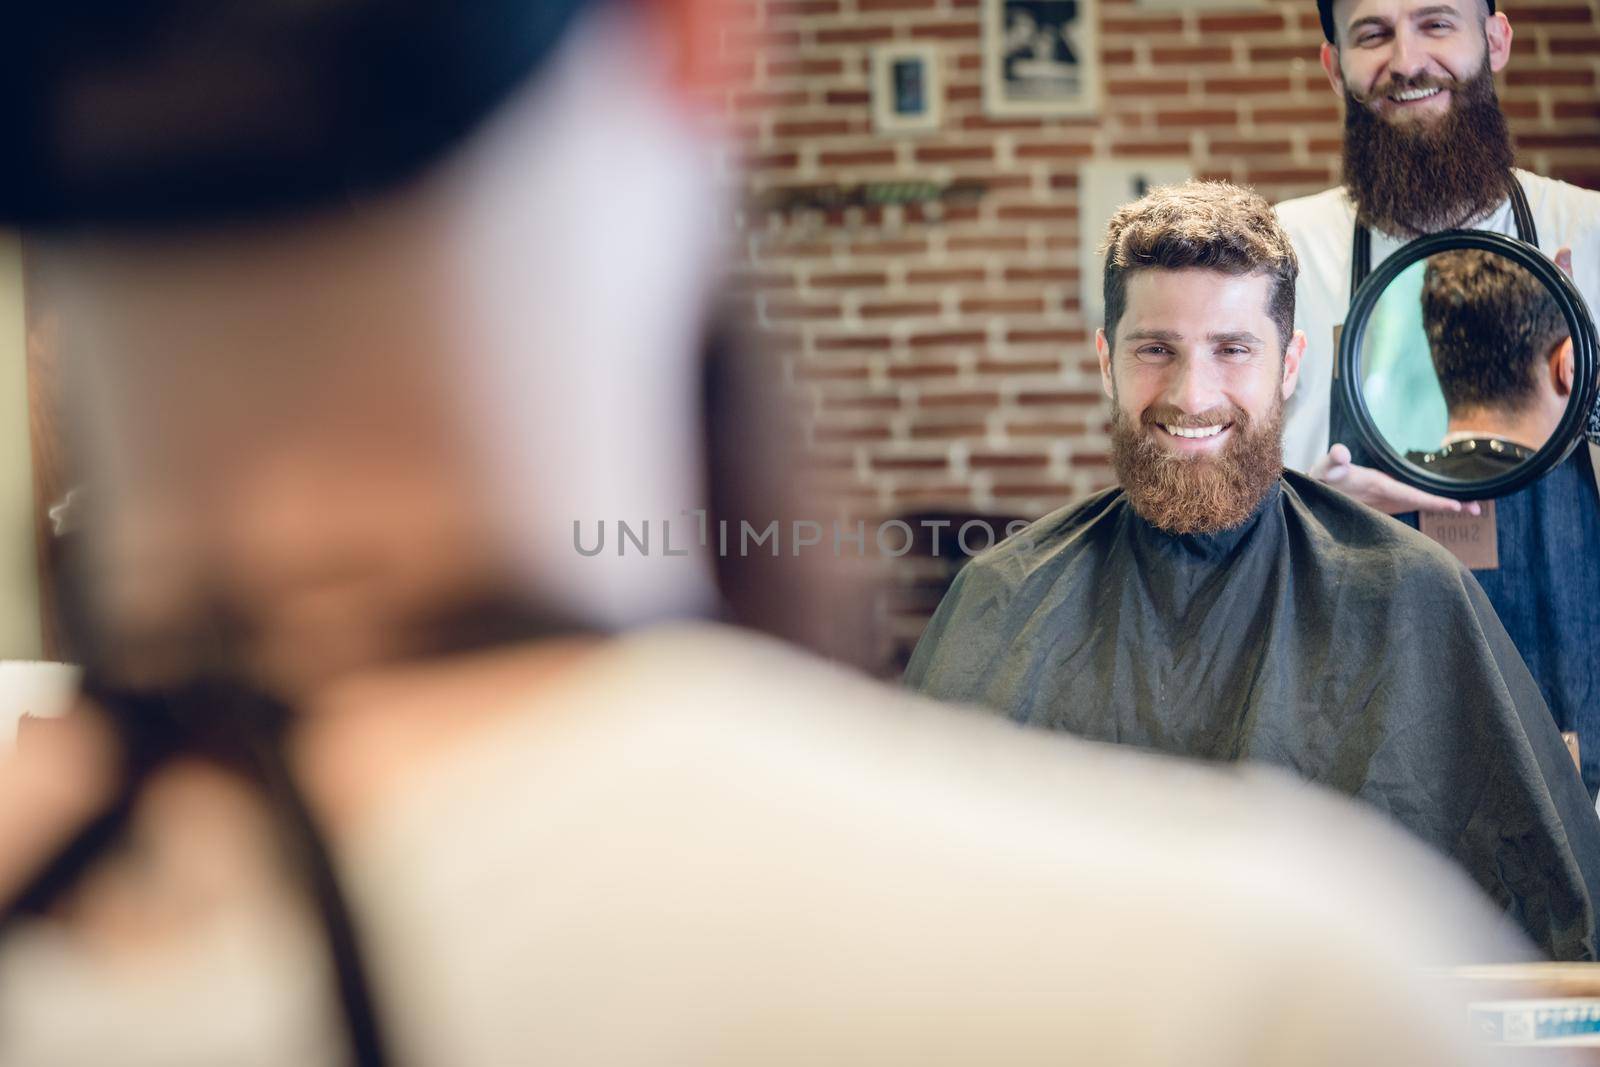 Over the shoulder view of a handsome young man smiling while looking at his new trendy haircut, in the mirror held by his experienced barber in a cool hair salon